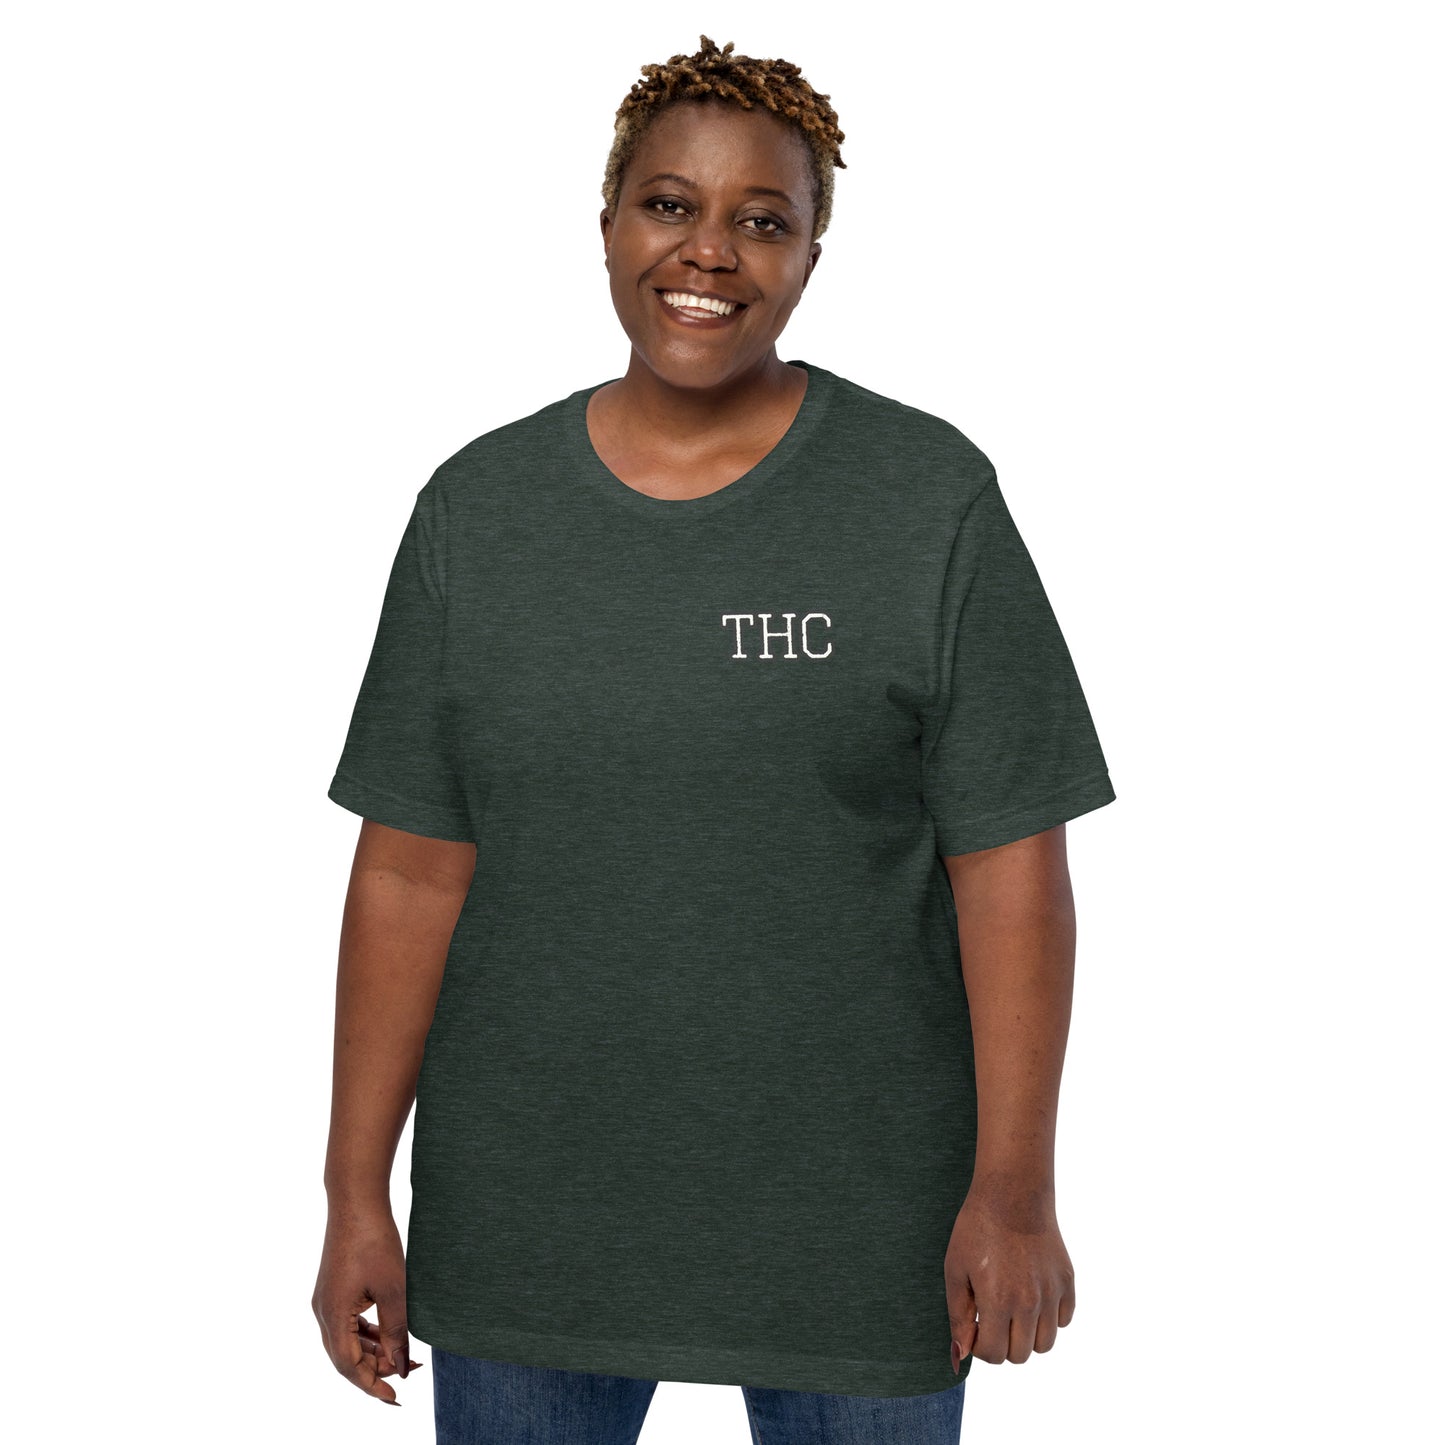 THE HOOKAH CONNECTION (Jersey Style Premium T-Shirt)